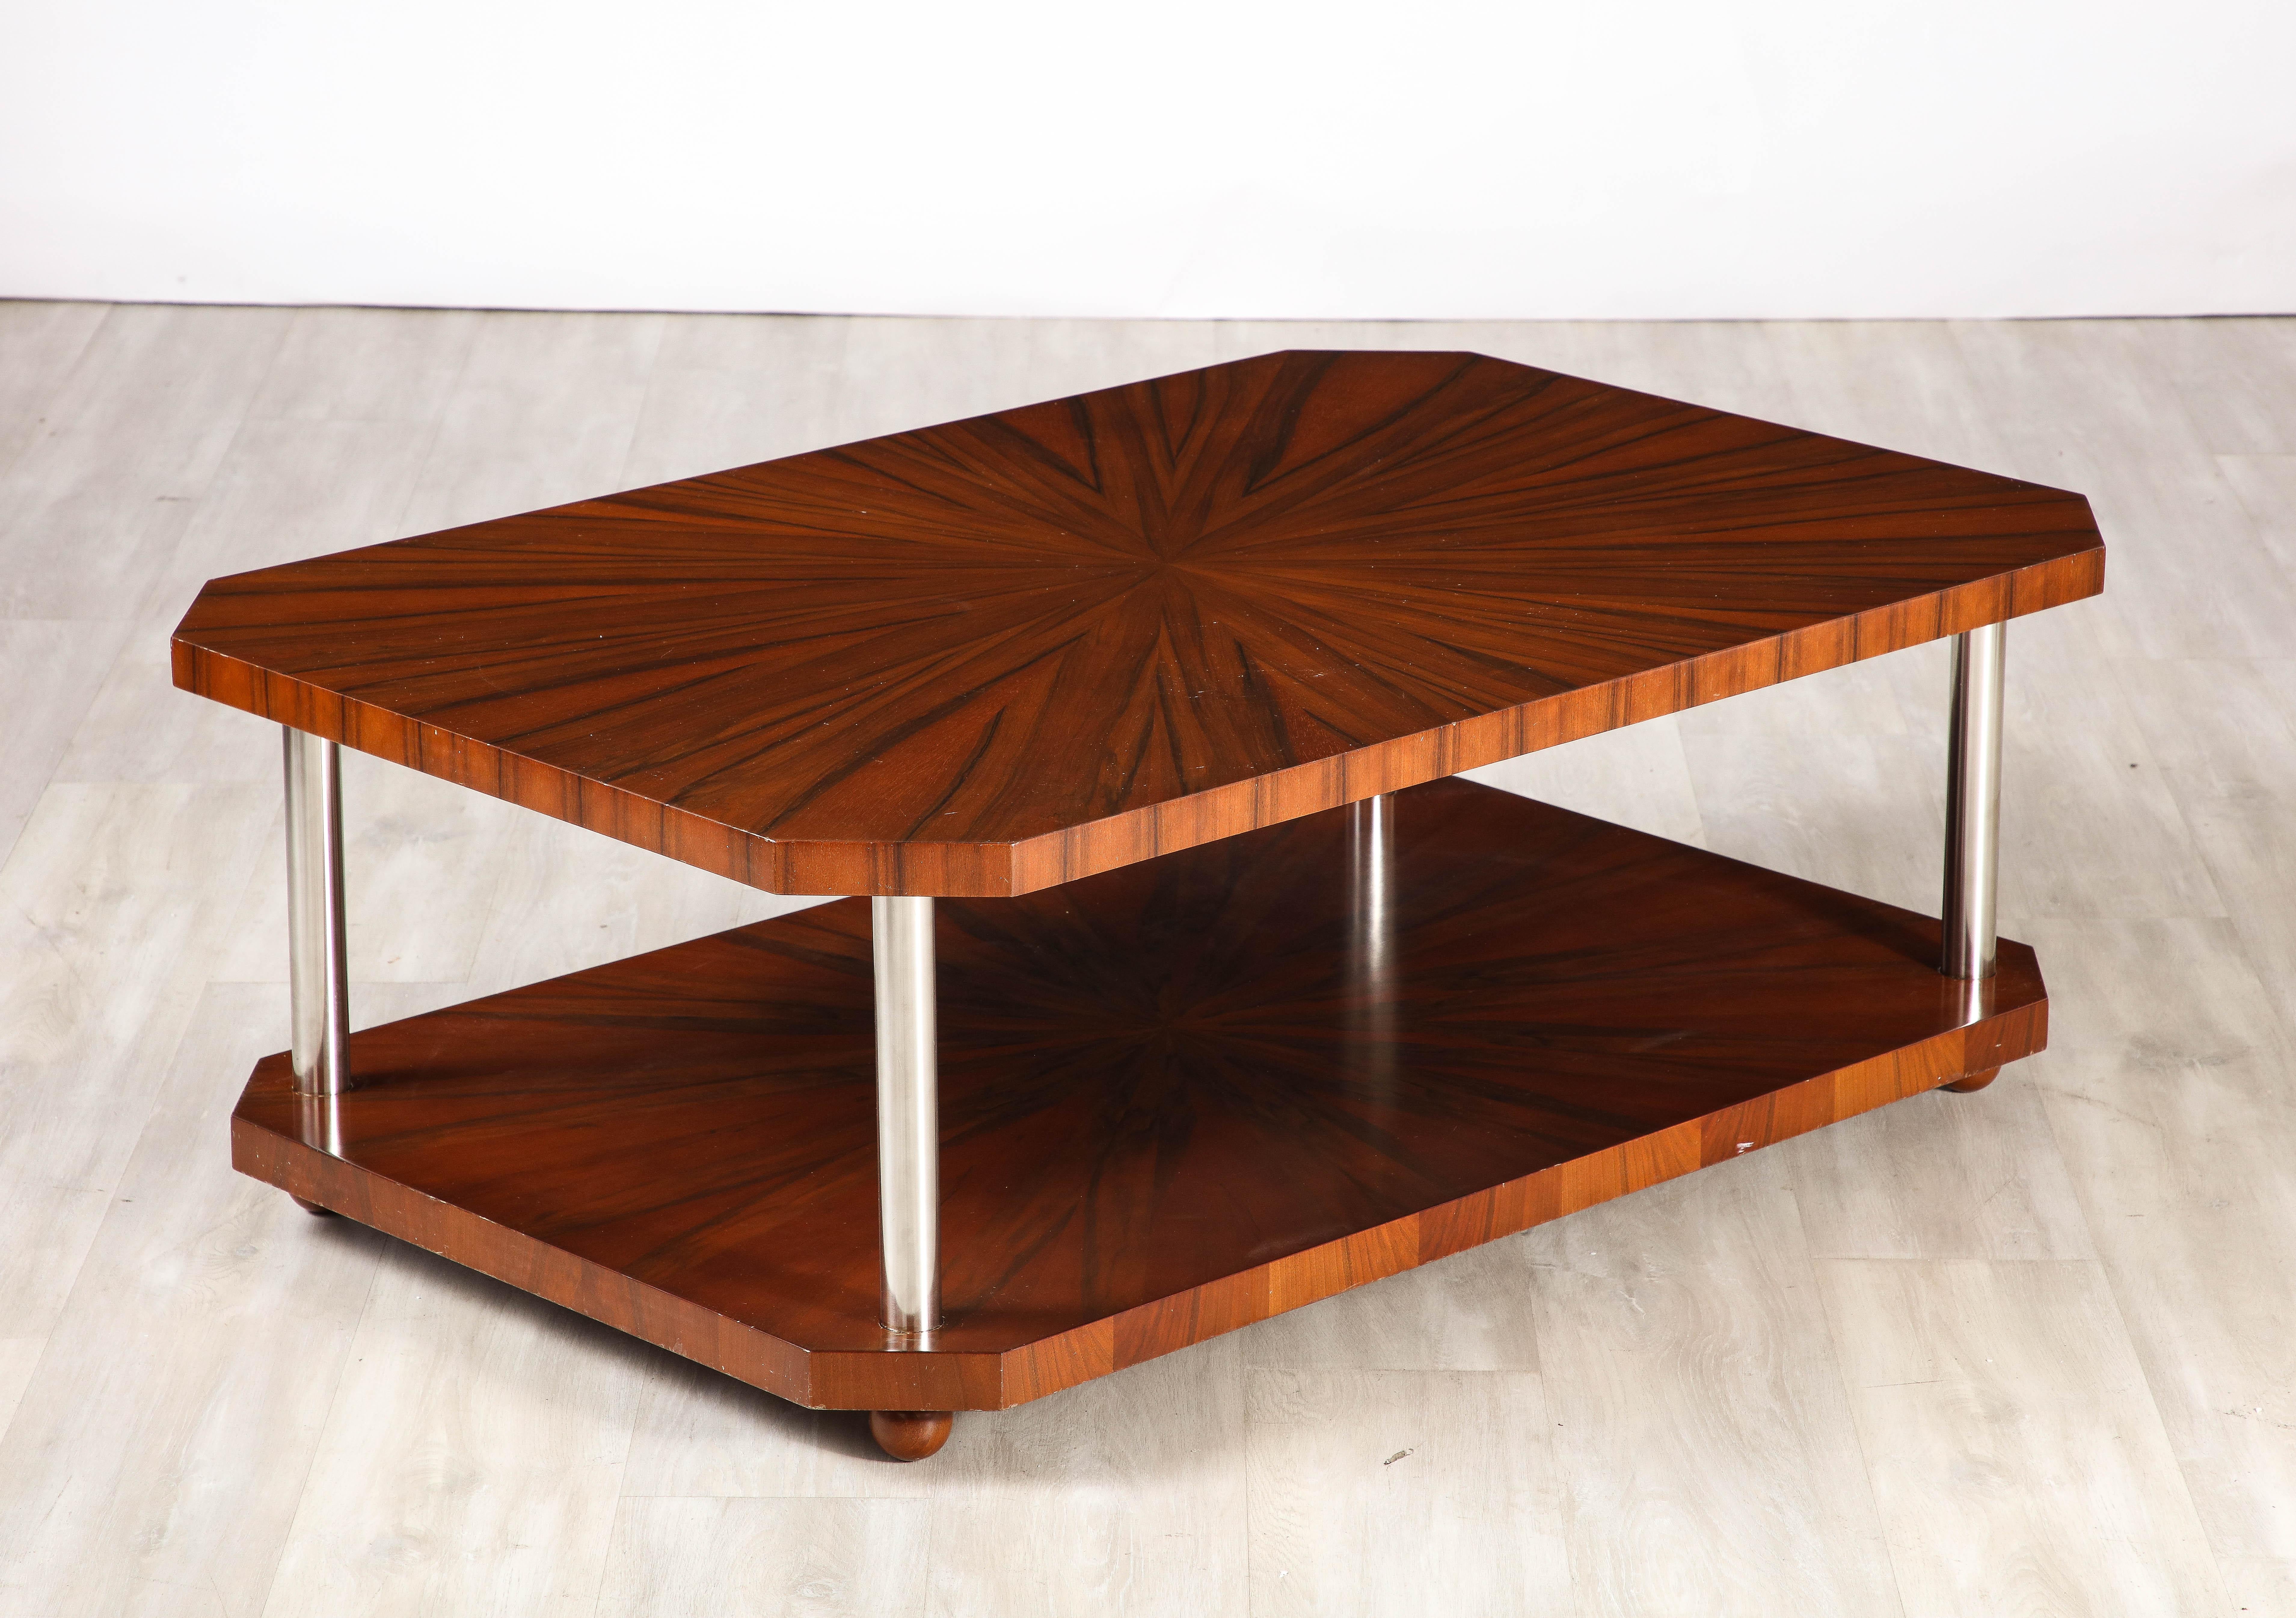 French Art Deco Rectangular Wood Coffee Table, circa 1940  For Sale 5